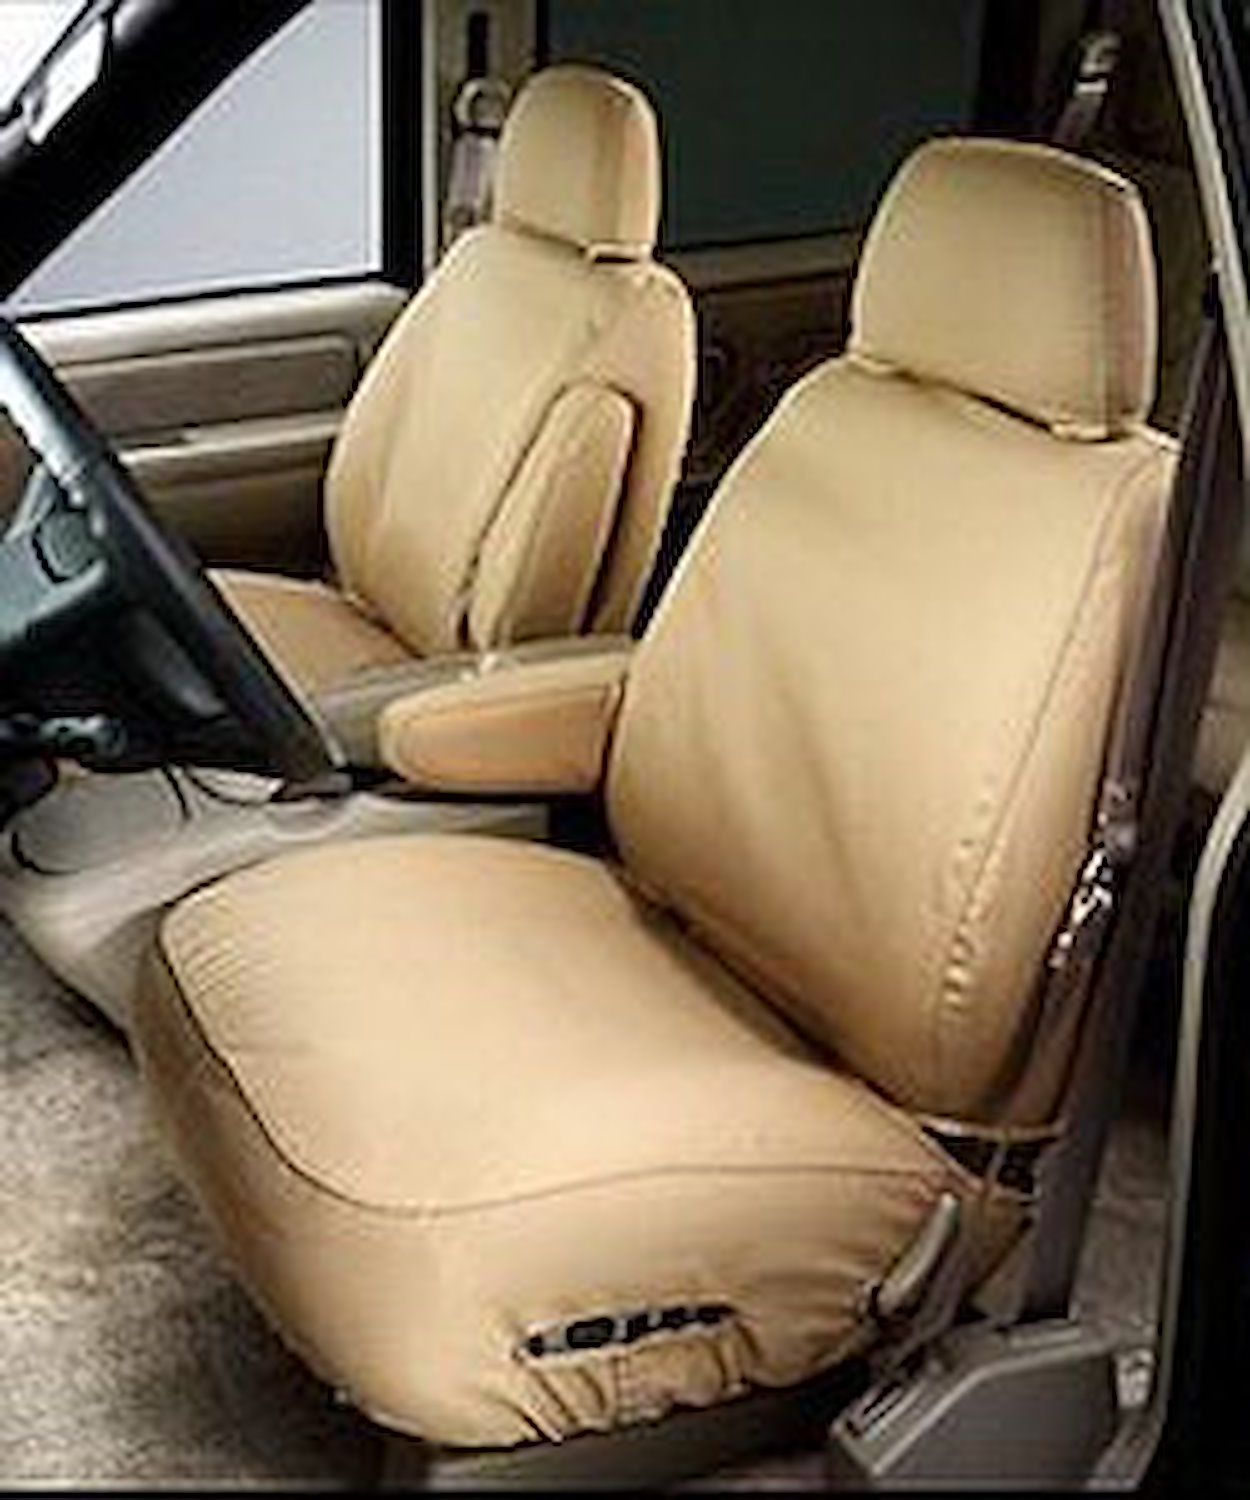 SeatSaver Custom Seat Cover Polycotton Taupe w/40/20/40 Bench Seat w/Adjustable Headrest w/Covered Fold Down Console